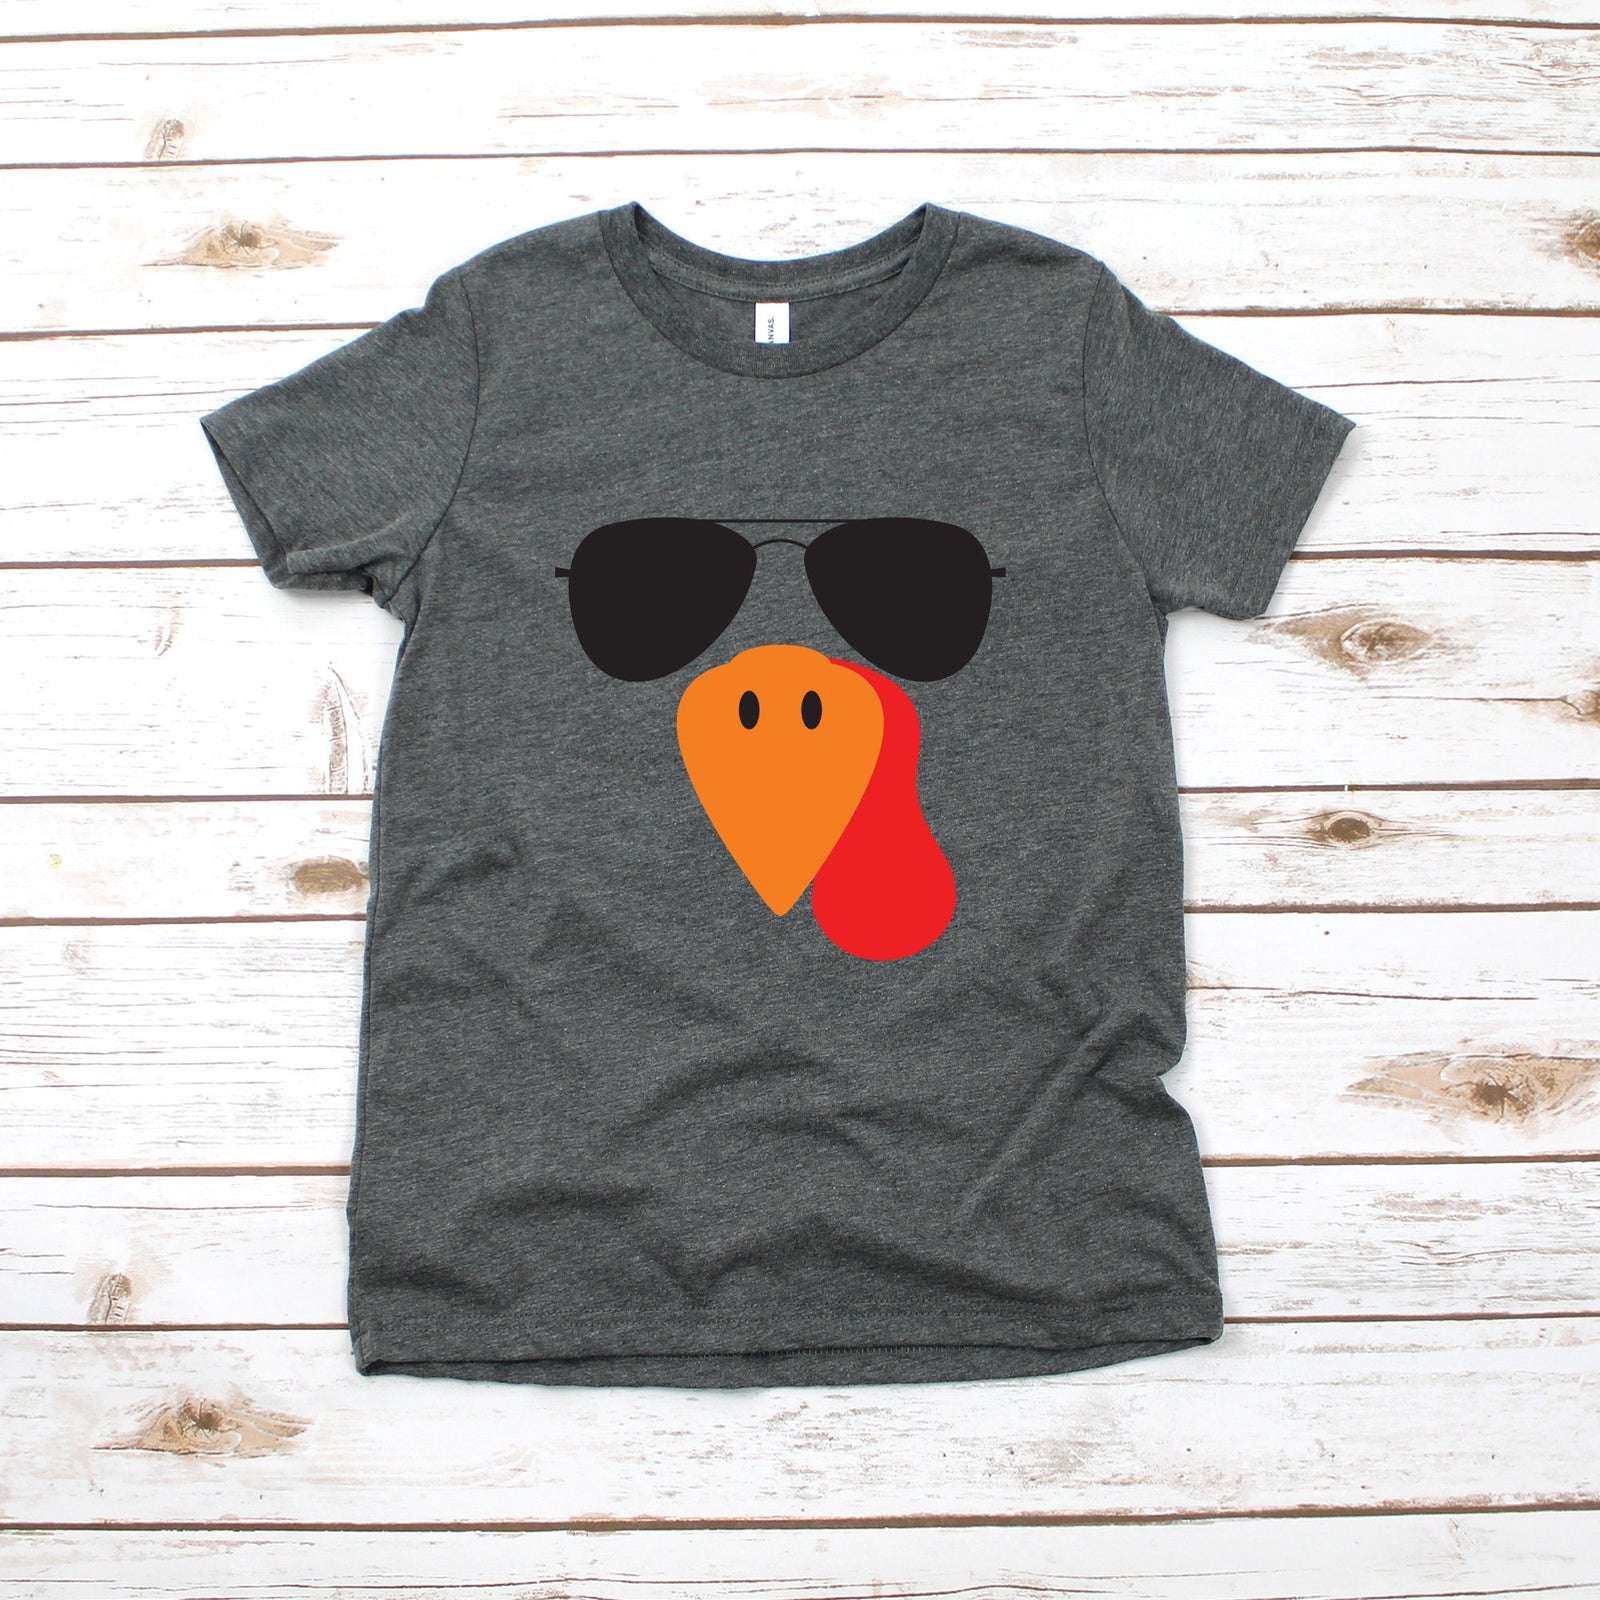 Cool Turkey Infant Toddler or Youth T Shirt - Thanksgiving Shirt - Funny - Family Matching